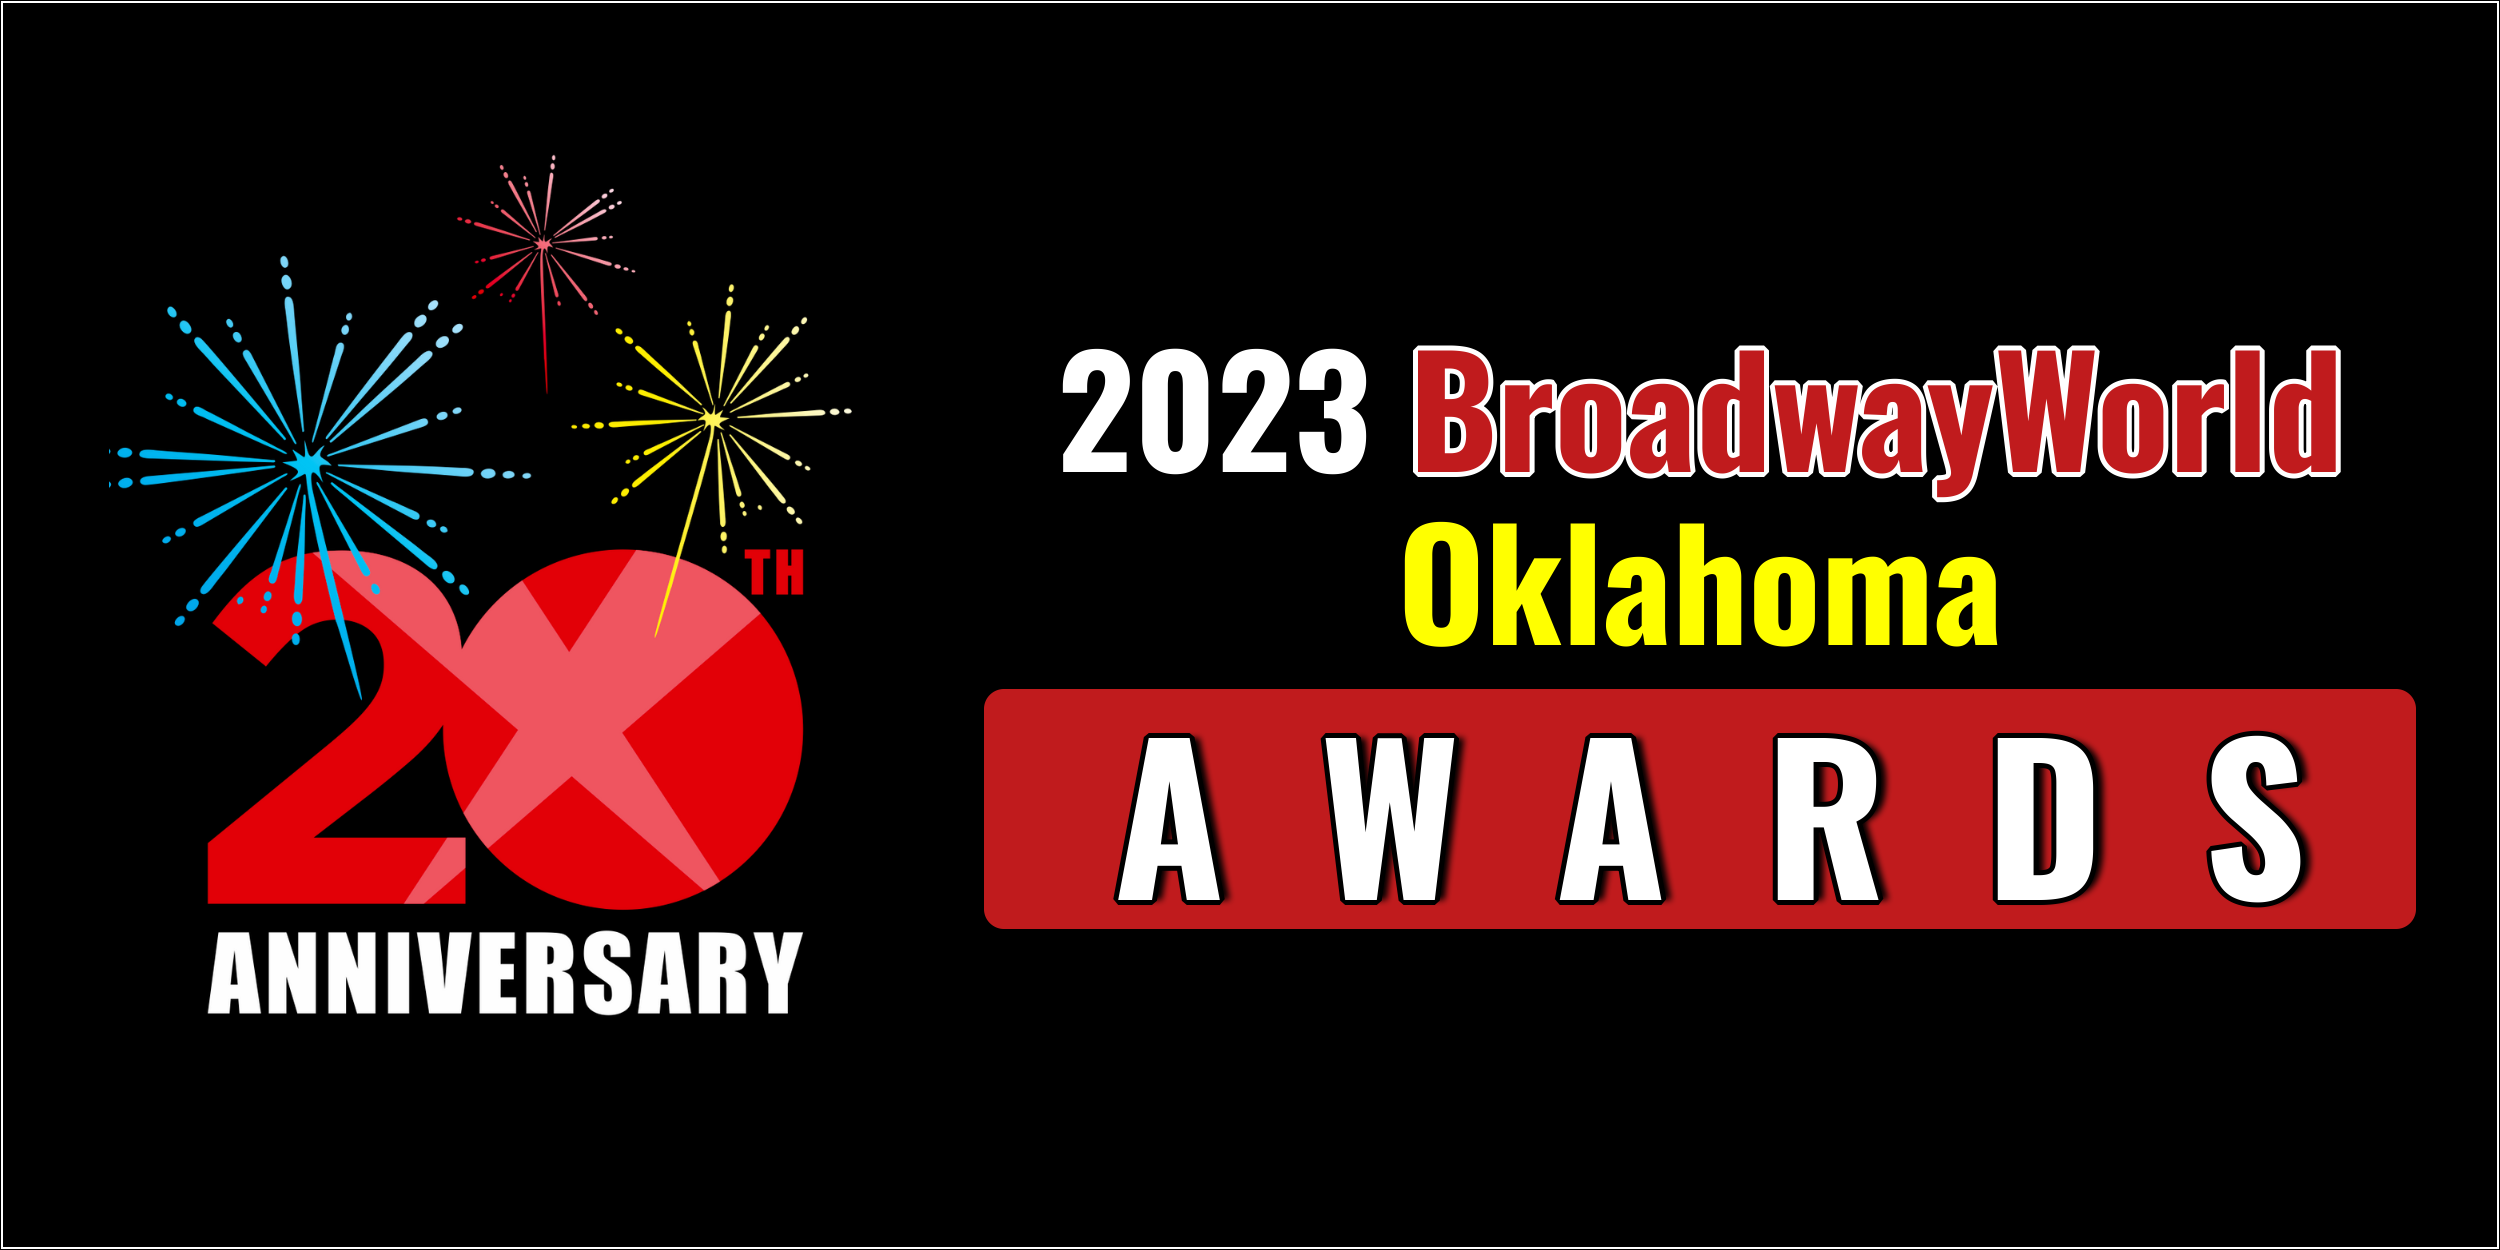 BroadwayWorld Oklahoma Awards December 5th Standings; THE SOUND OF MUSIC Leads Best Musical! 